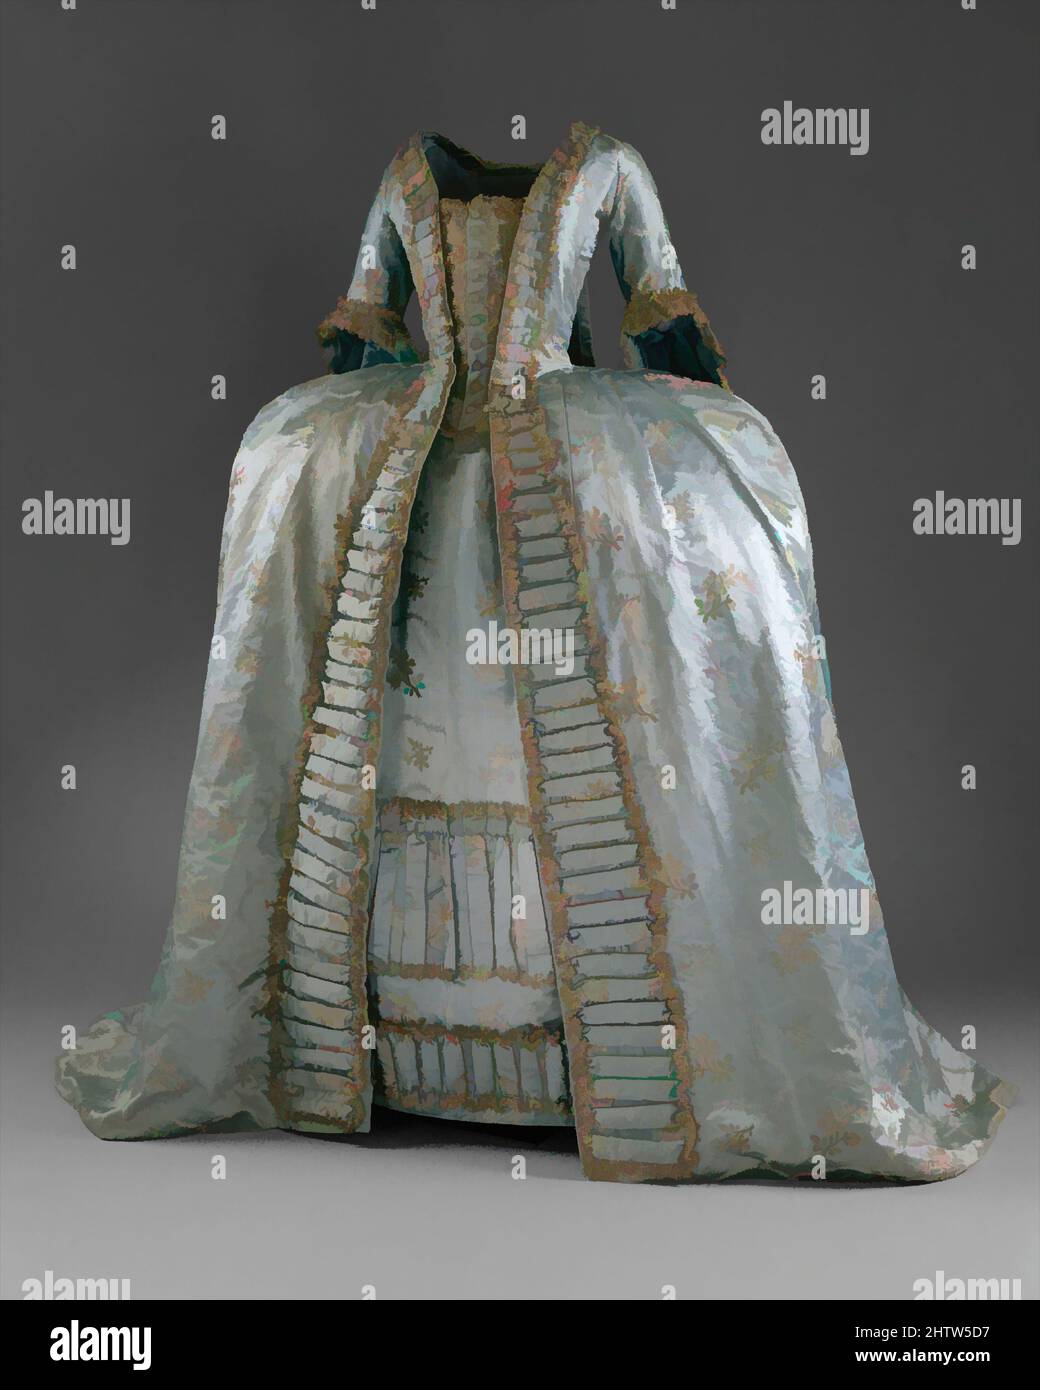 Art inspired by Robe à la Française, ca. 1765, European, silk, Like the Mantua, the sack, or sacque, dress began life as an informal garment. It was initially a French fashion, its defining feature being the row of two double box pleats sewn in at the center of the neckline at the back, Classic works modernized by Artotop with a splash of modernity. Shapes, color and value, eye-catching visual impact on art. Emotions through freedom of artworks in a contemporary way. A timeless message pursuing a wildly creative new direction. Artists turning to the digital medium and creating the Artotop NFT Stock Photo